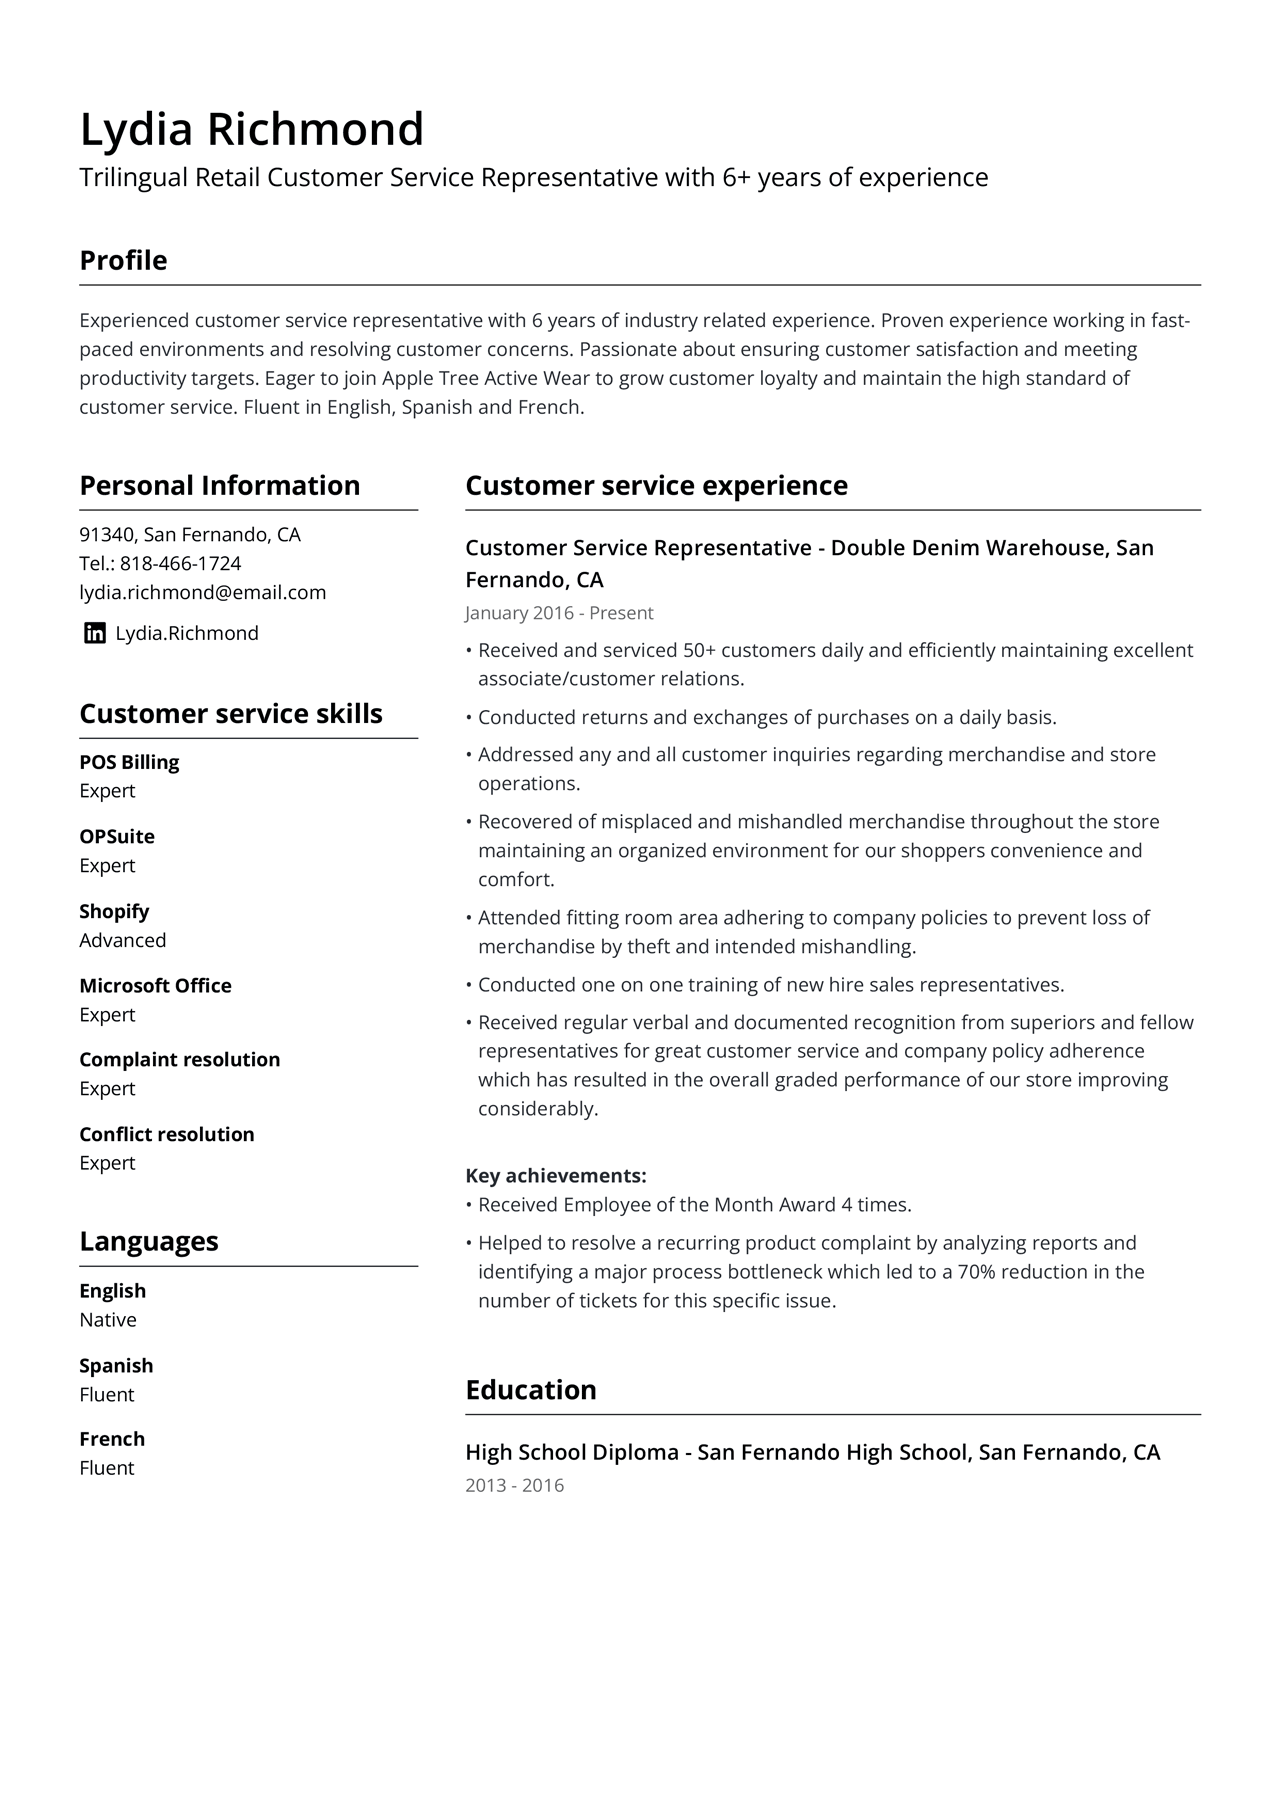 A finished retail customer service resume example